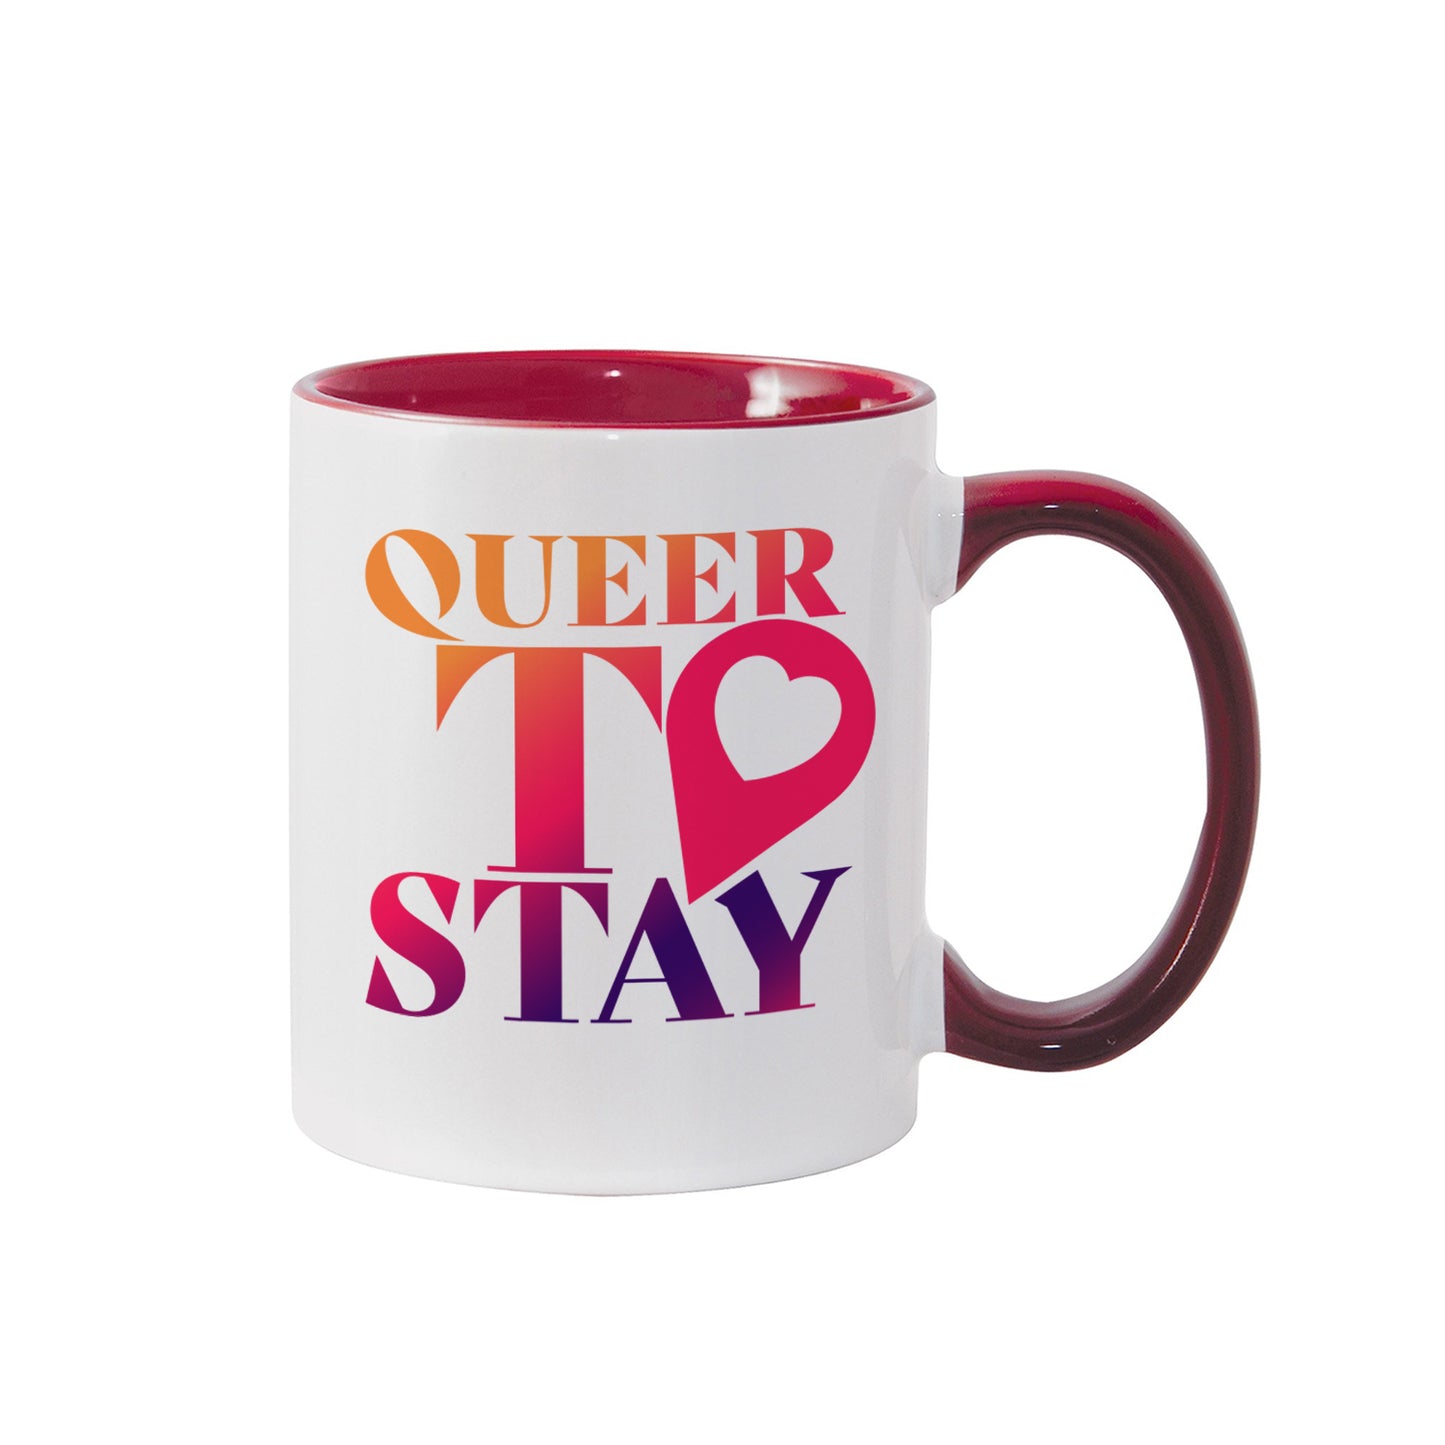 Showtime Queer To Stay Logo Tasse bicolore